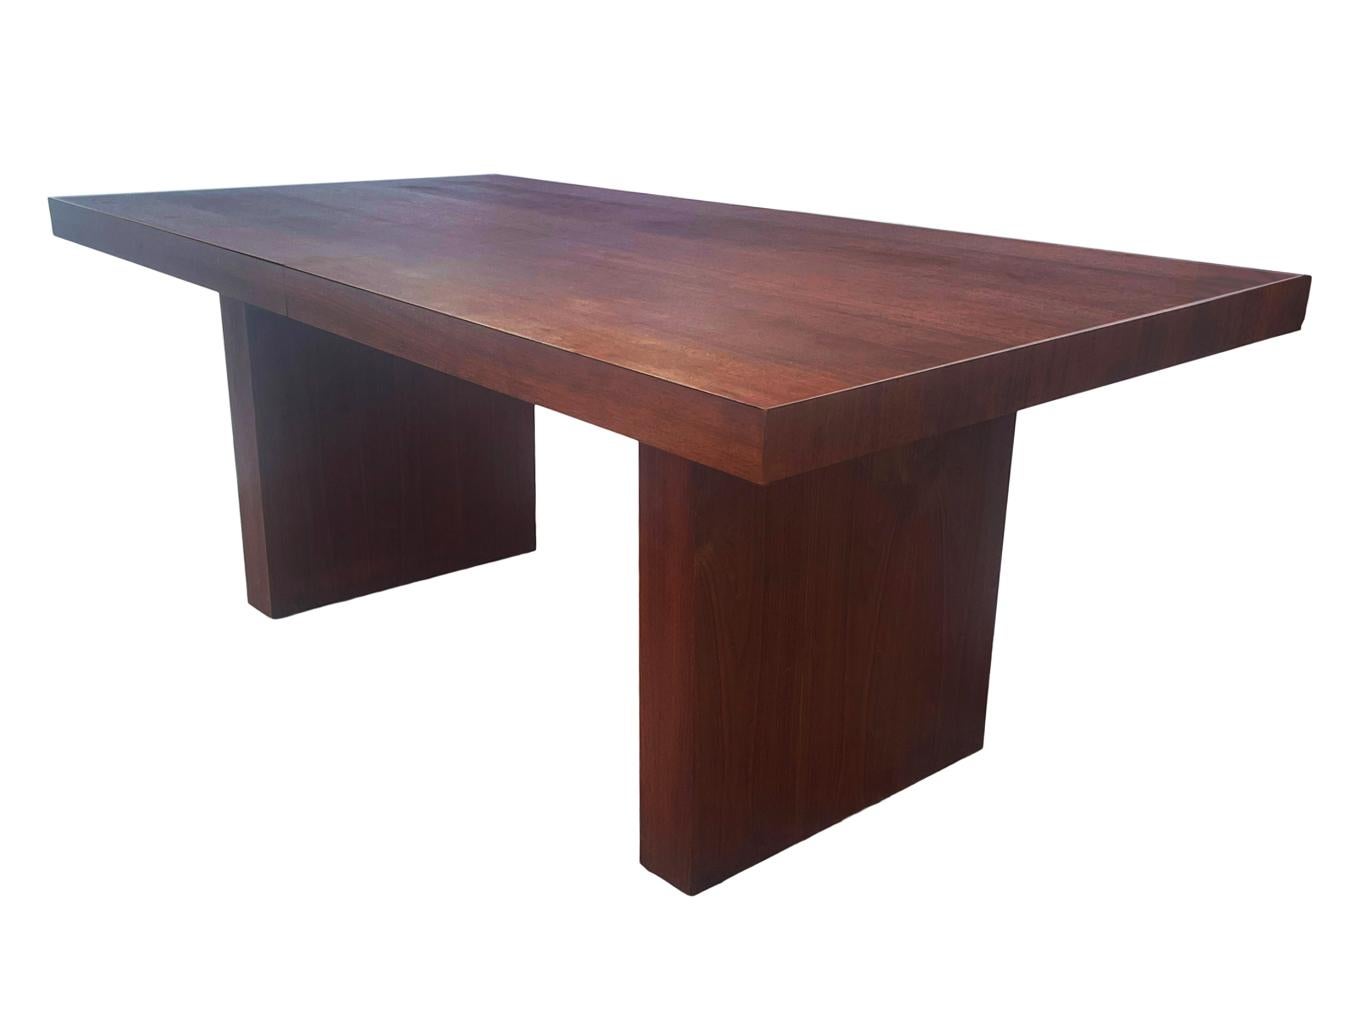 A clean line dining table by Arthur Umanoff circa 1960's. It features beautiful walnut wood construction. It comes with two 18 inch leaves not shown. Maximum length is 108 inches with leaves. Very clean and ready to use condition.